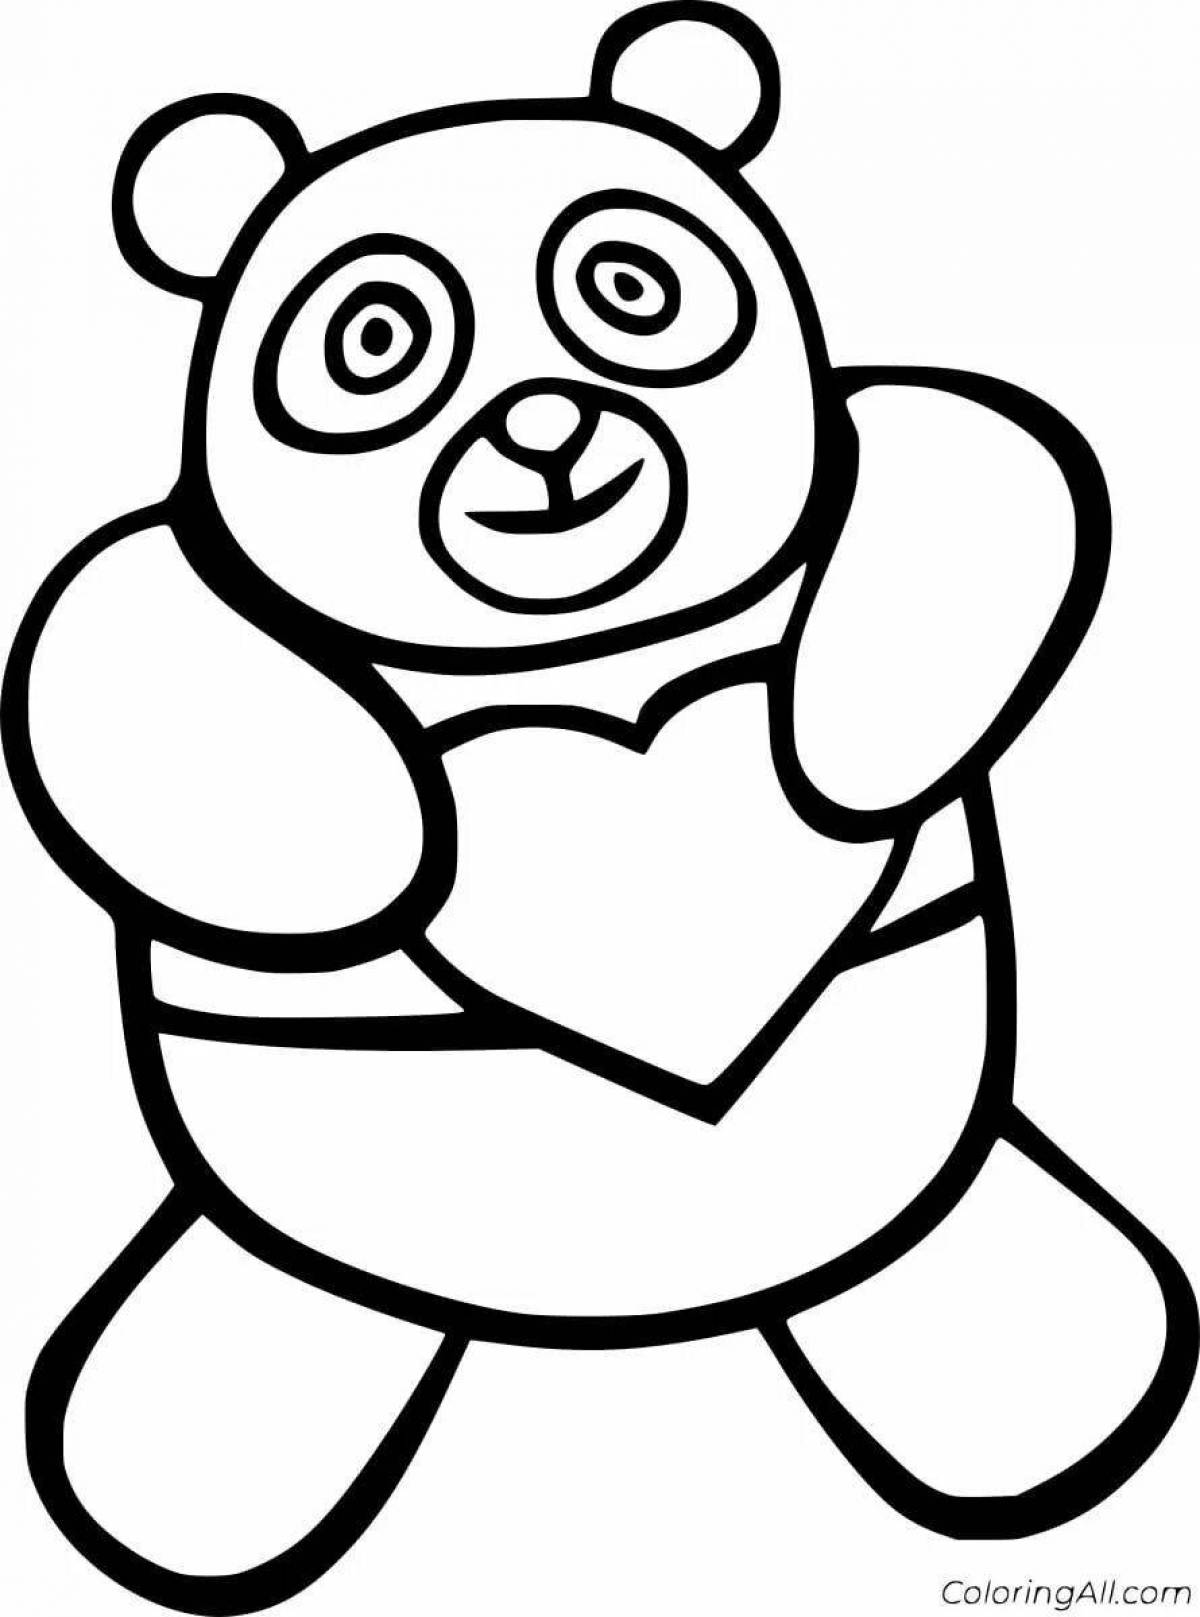 Awesome panda coloring pages for girls